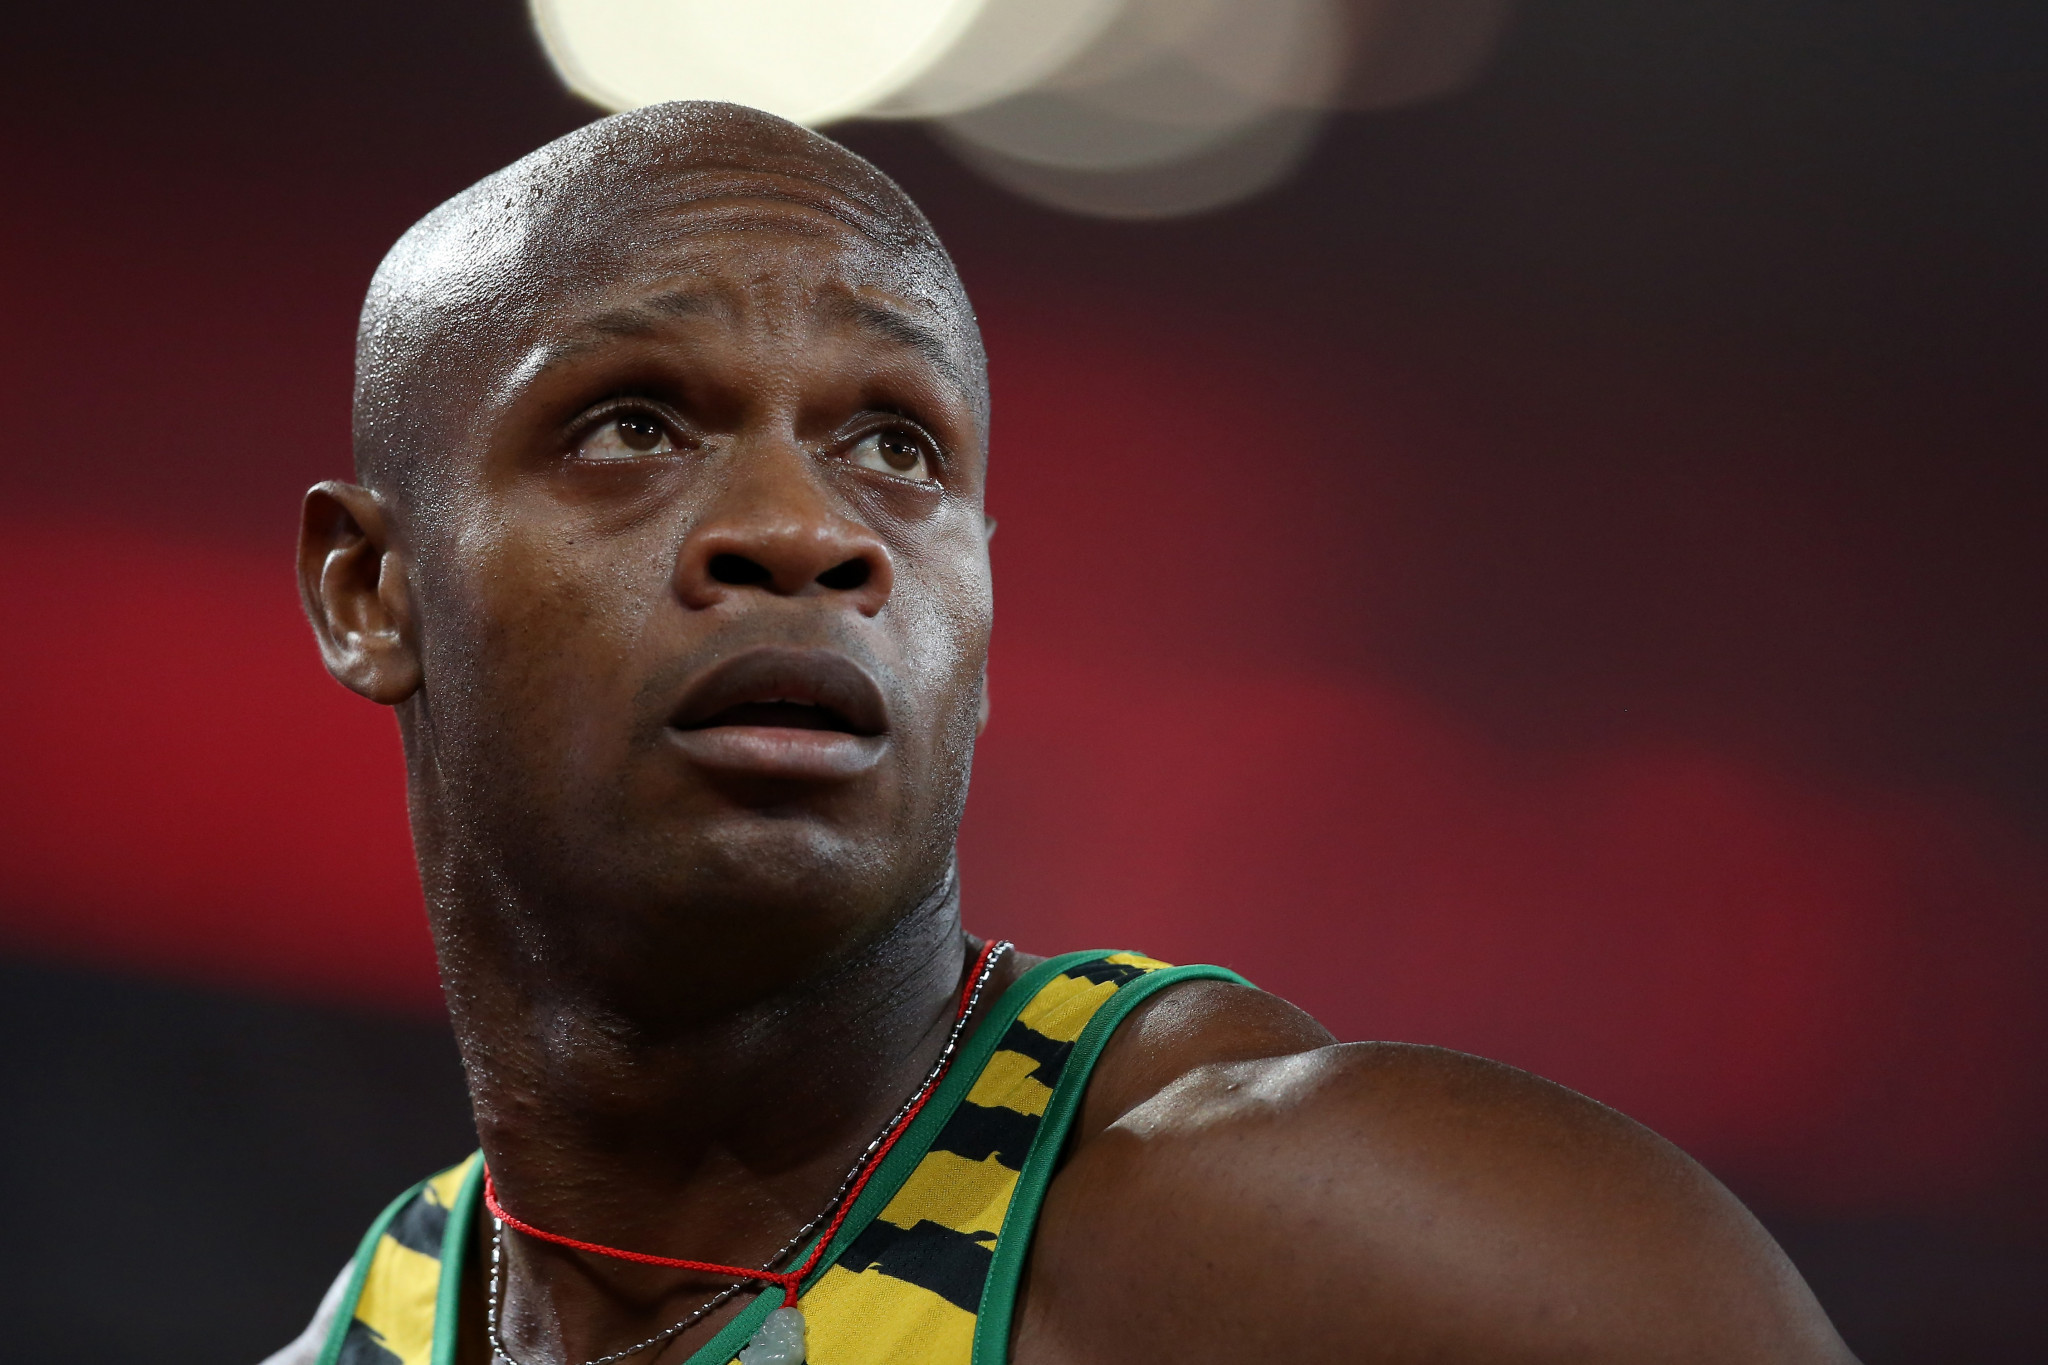 Asafa Powell is set to deliver a speech at the Max Velocity Speed Summit in Ghana ©Getty Images